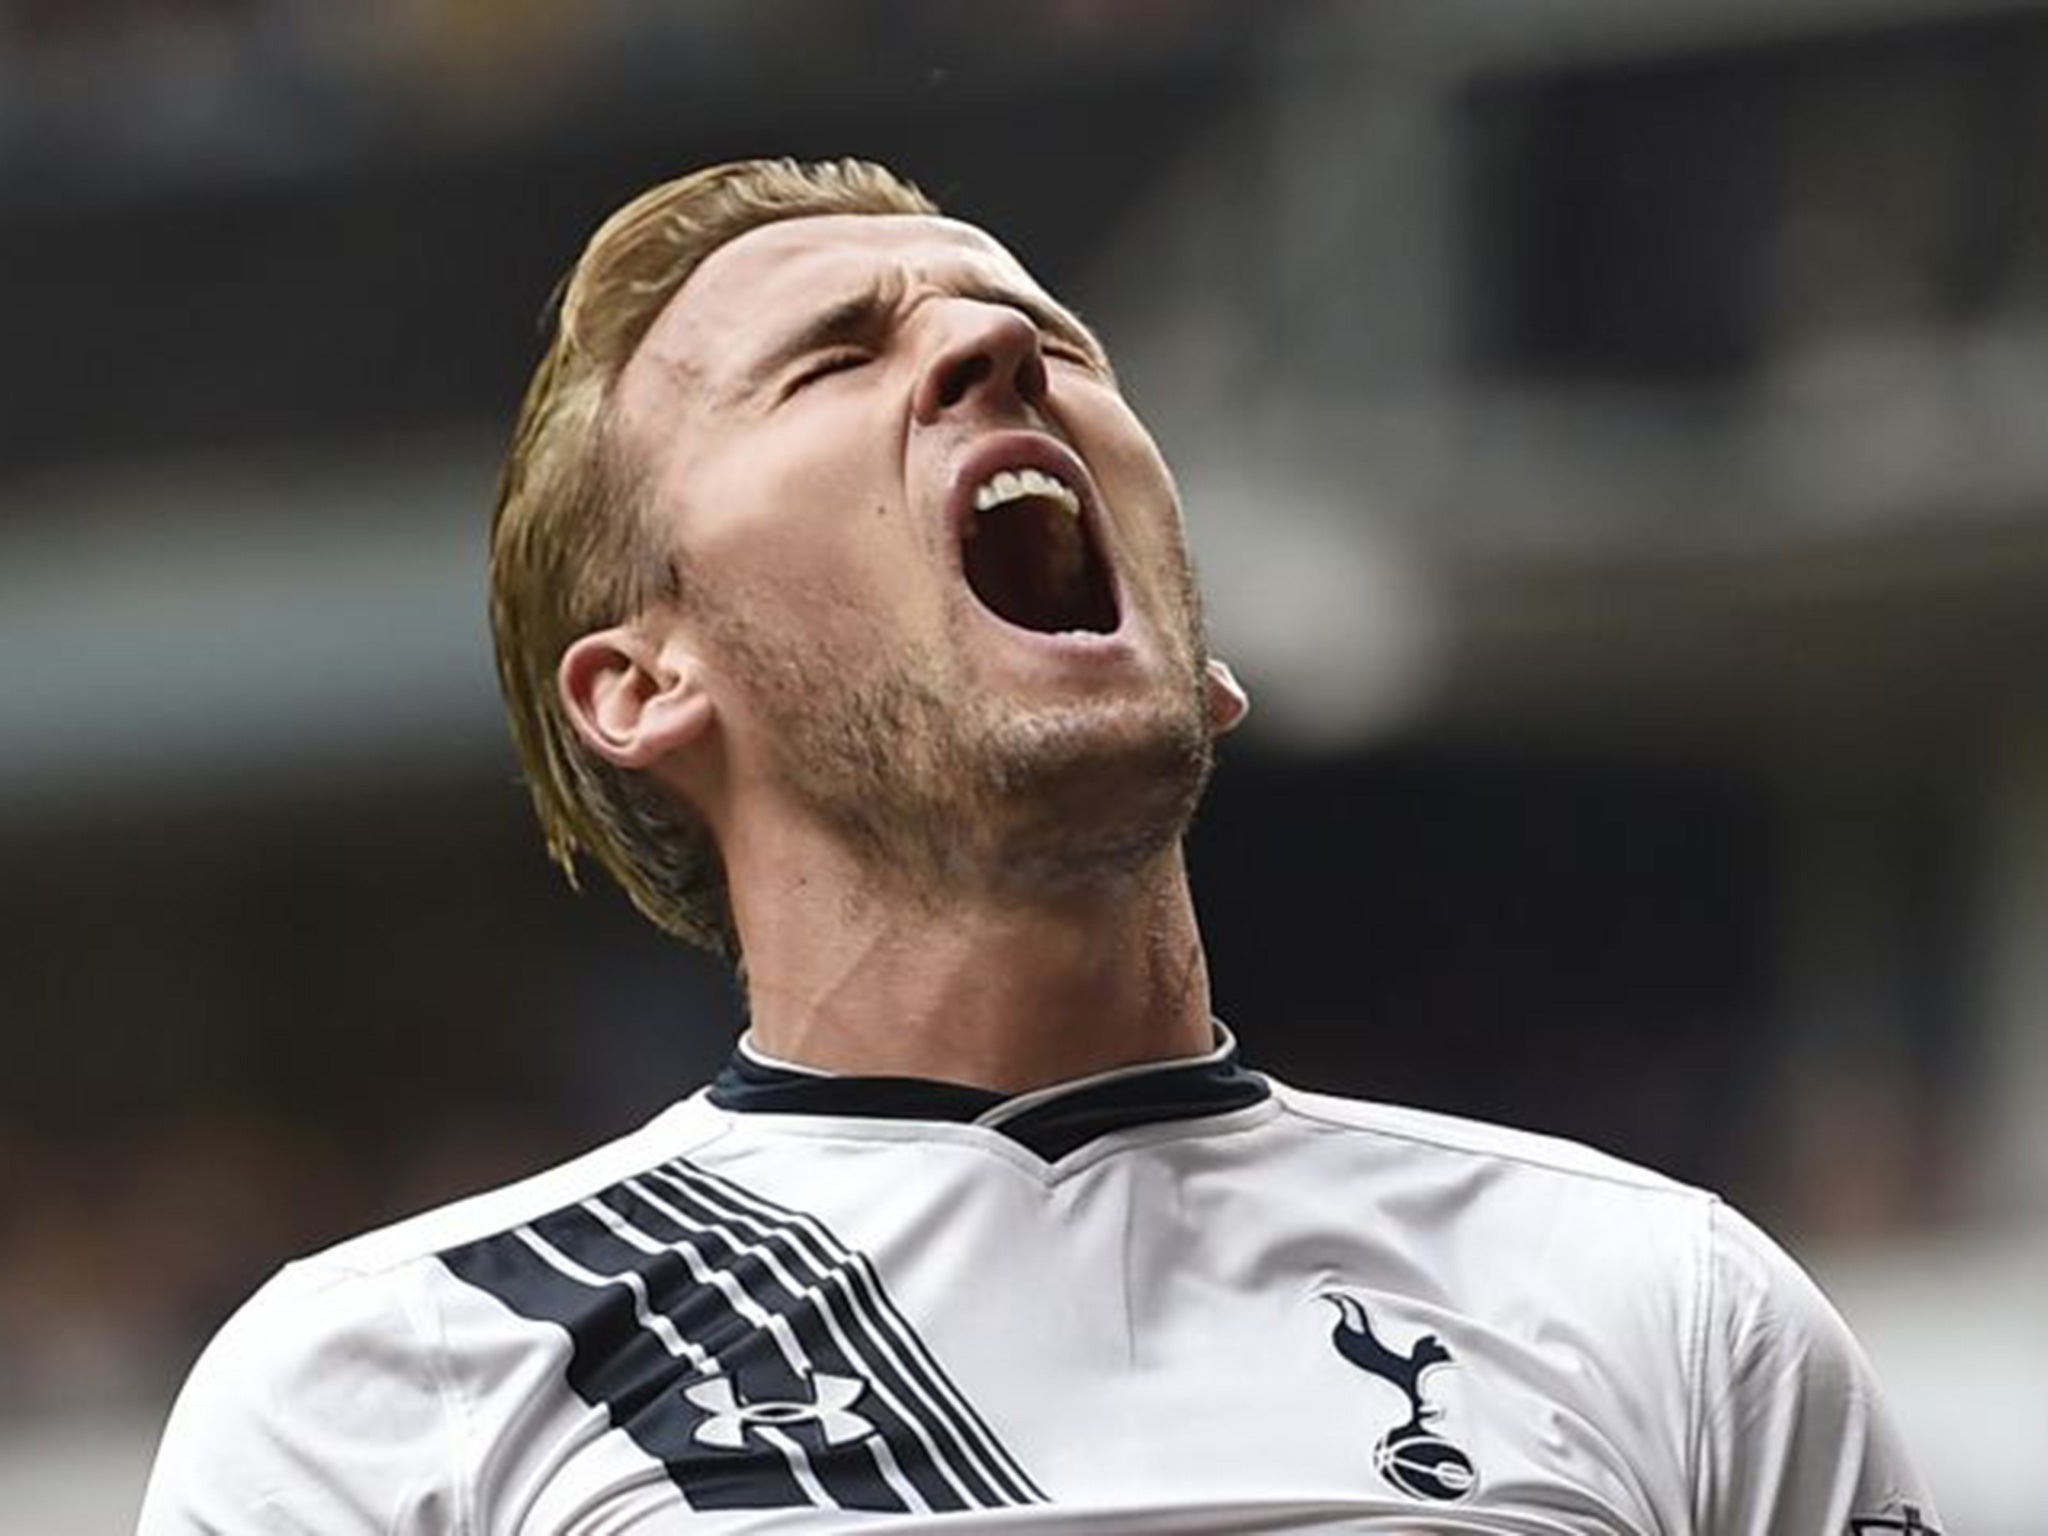 Harry's Kane goal scoring drought extended to five games